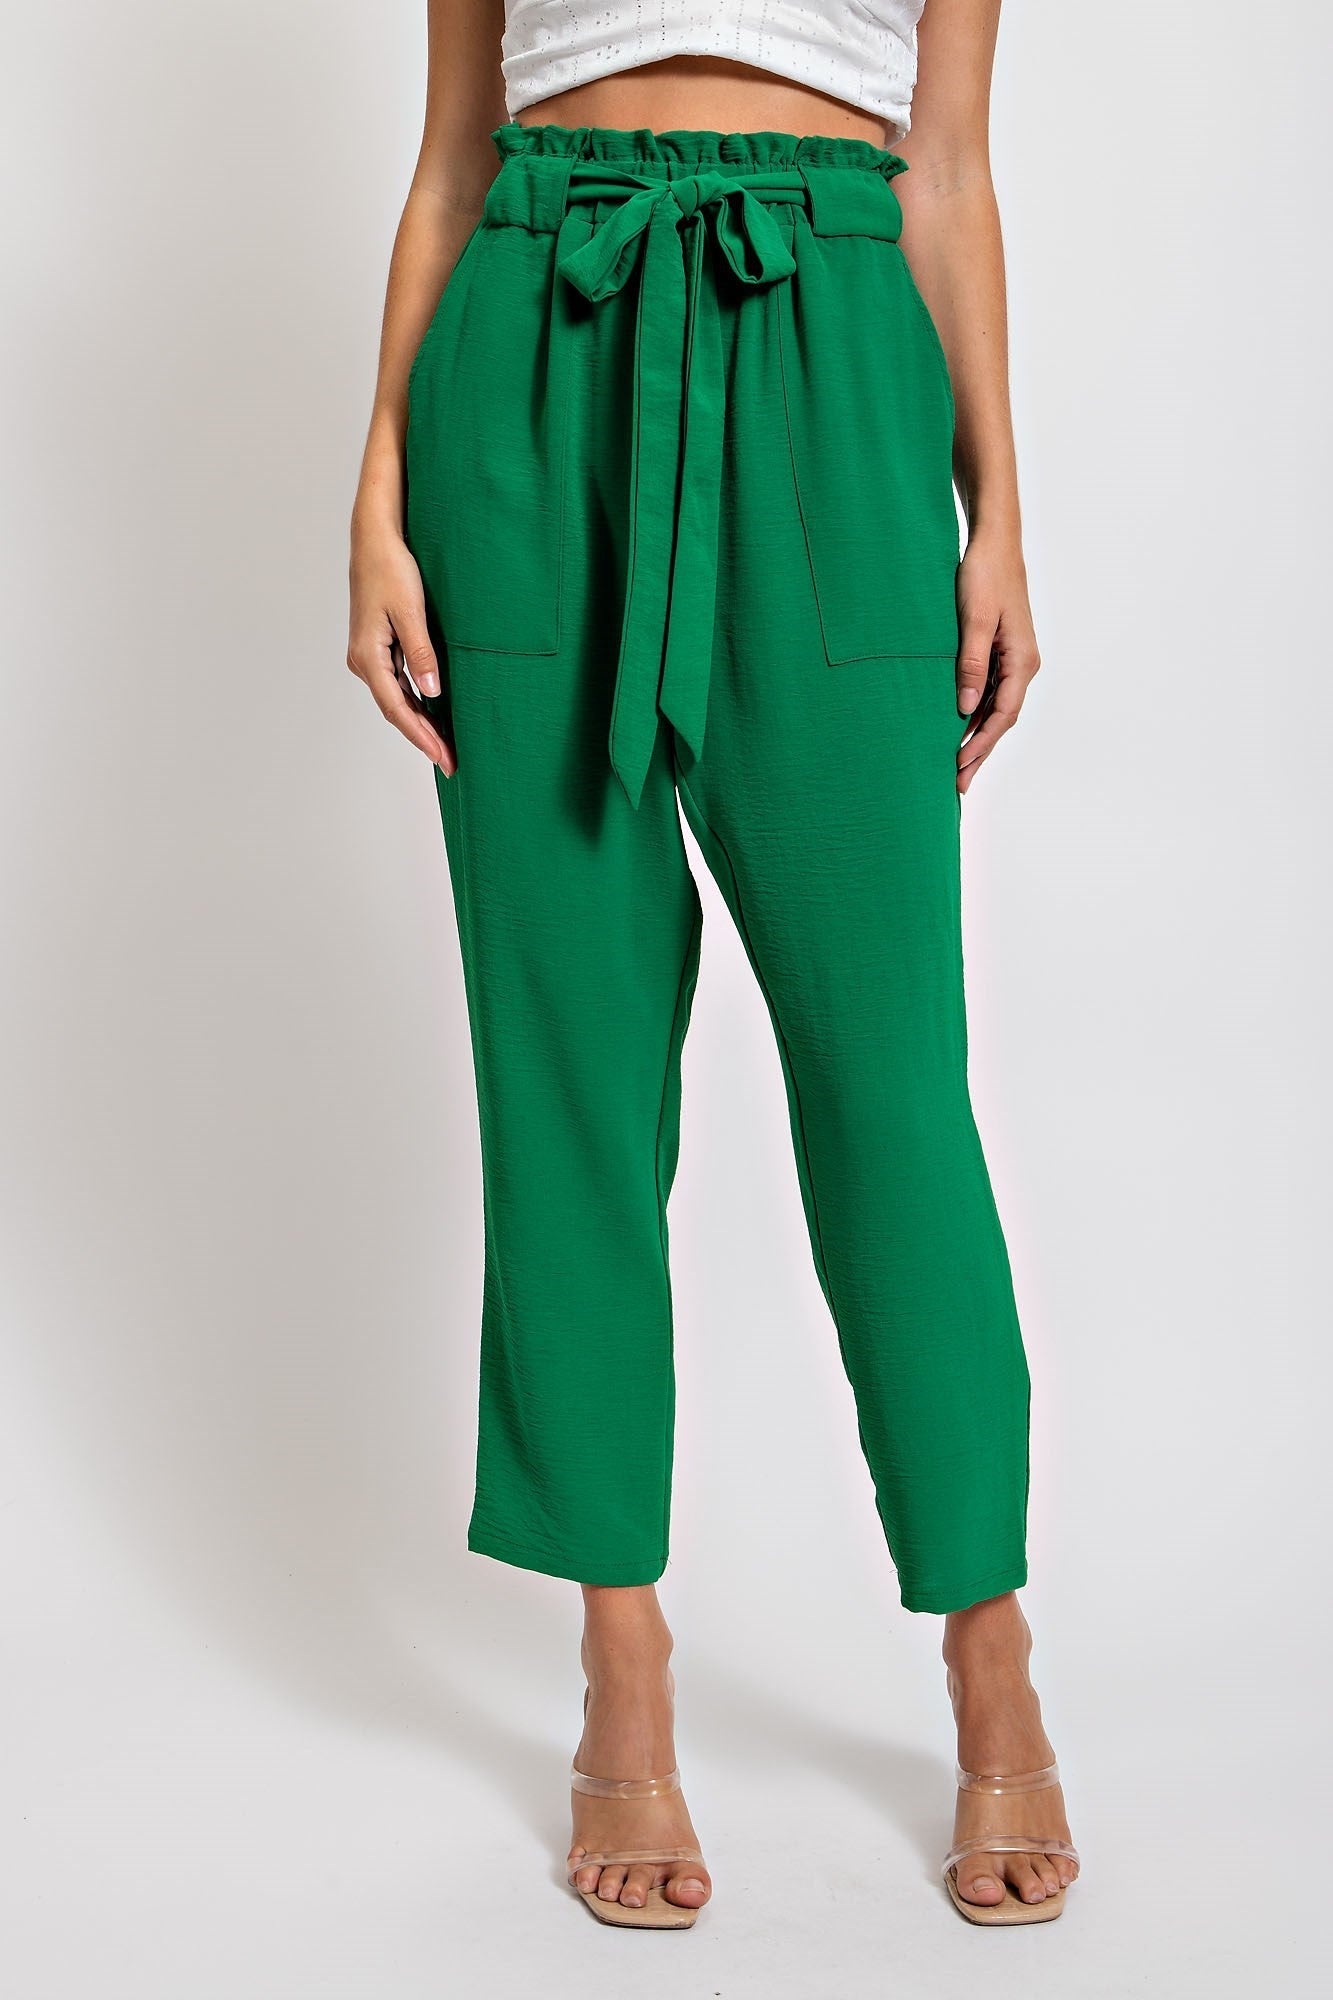 FOUR COLORS PaperBag High Waisted Pants